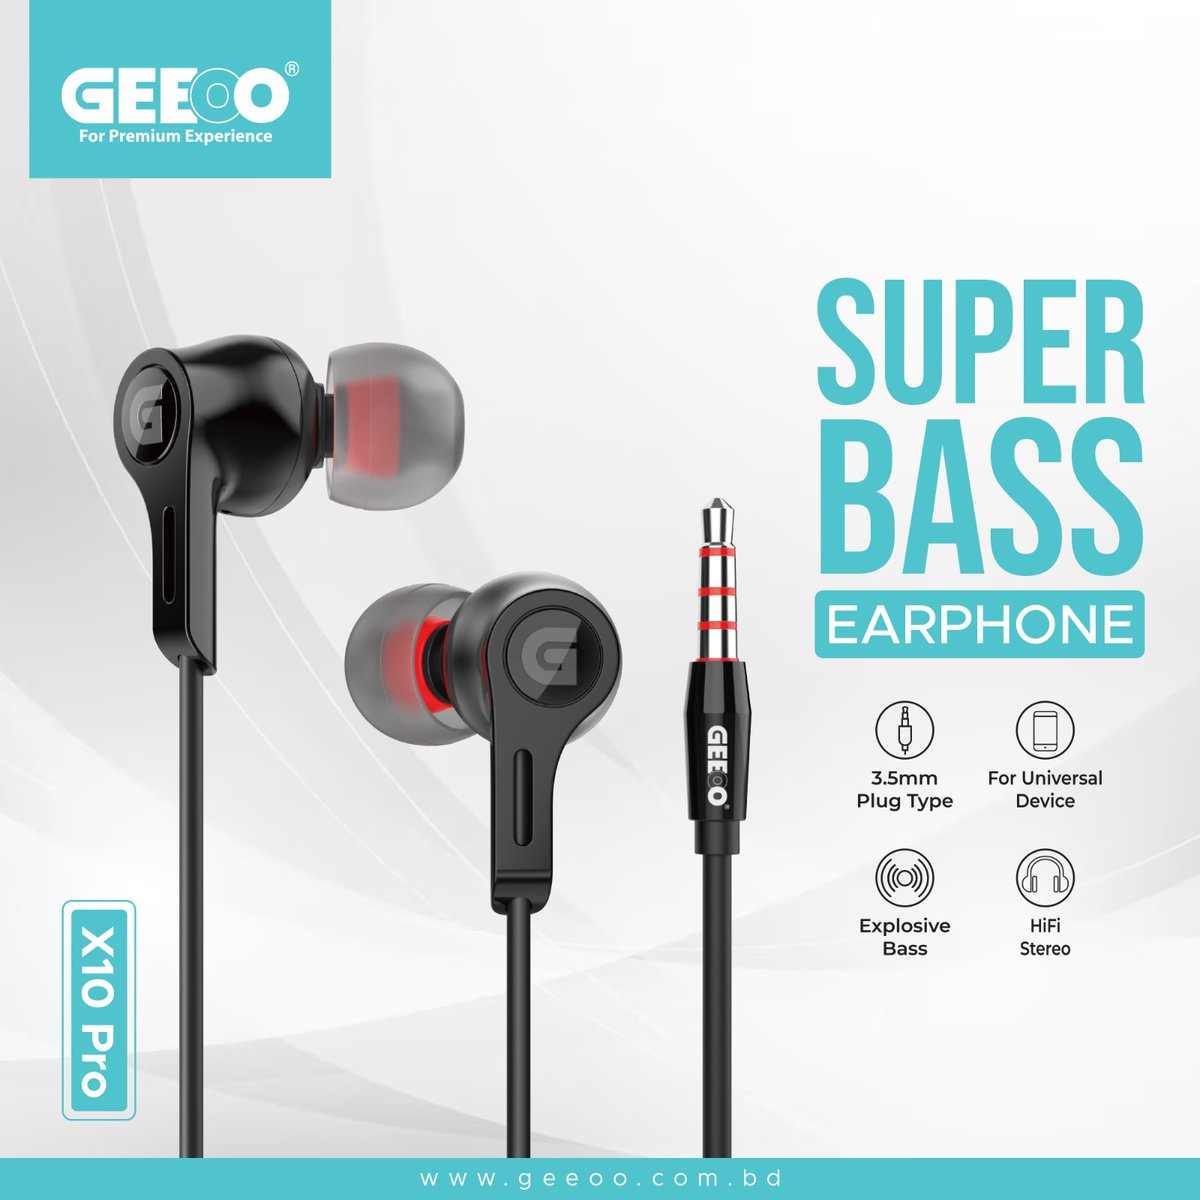 At a 25% Discount Price immerse yourself in a world of pure audio bliss. Order your GEEOO X10 Pro earphones today and unleash the audio beast within!
#earphones #X10Pro #GEEOO #earphone #Geeoo #bestearphones